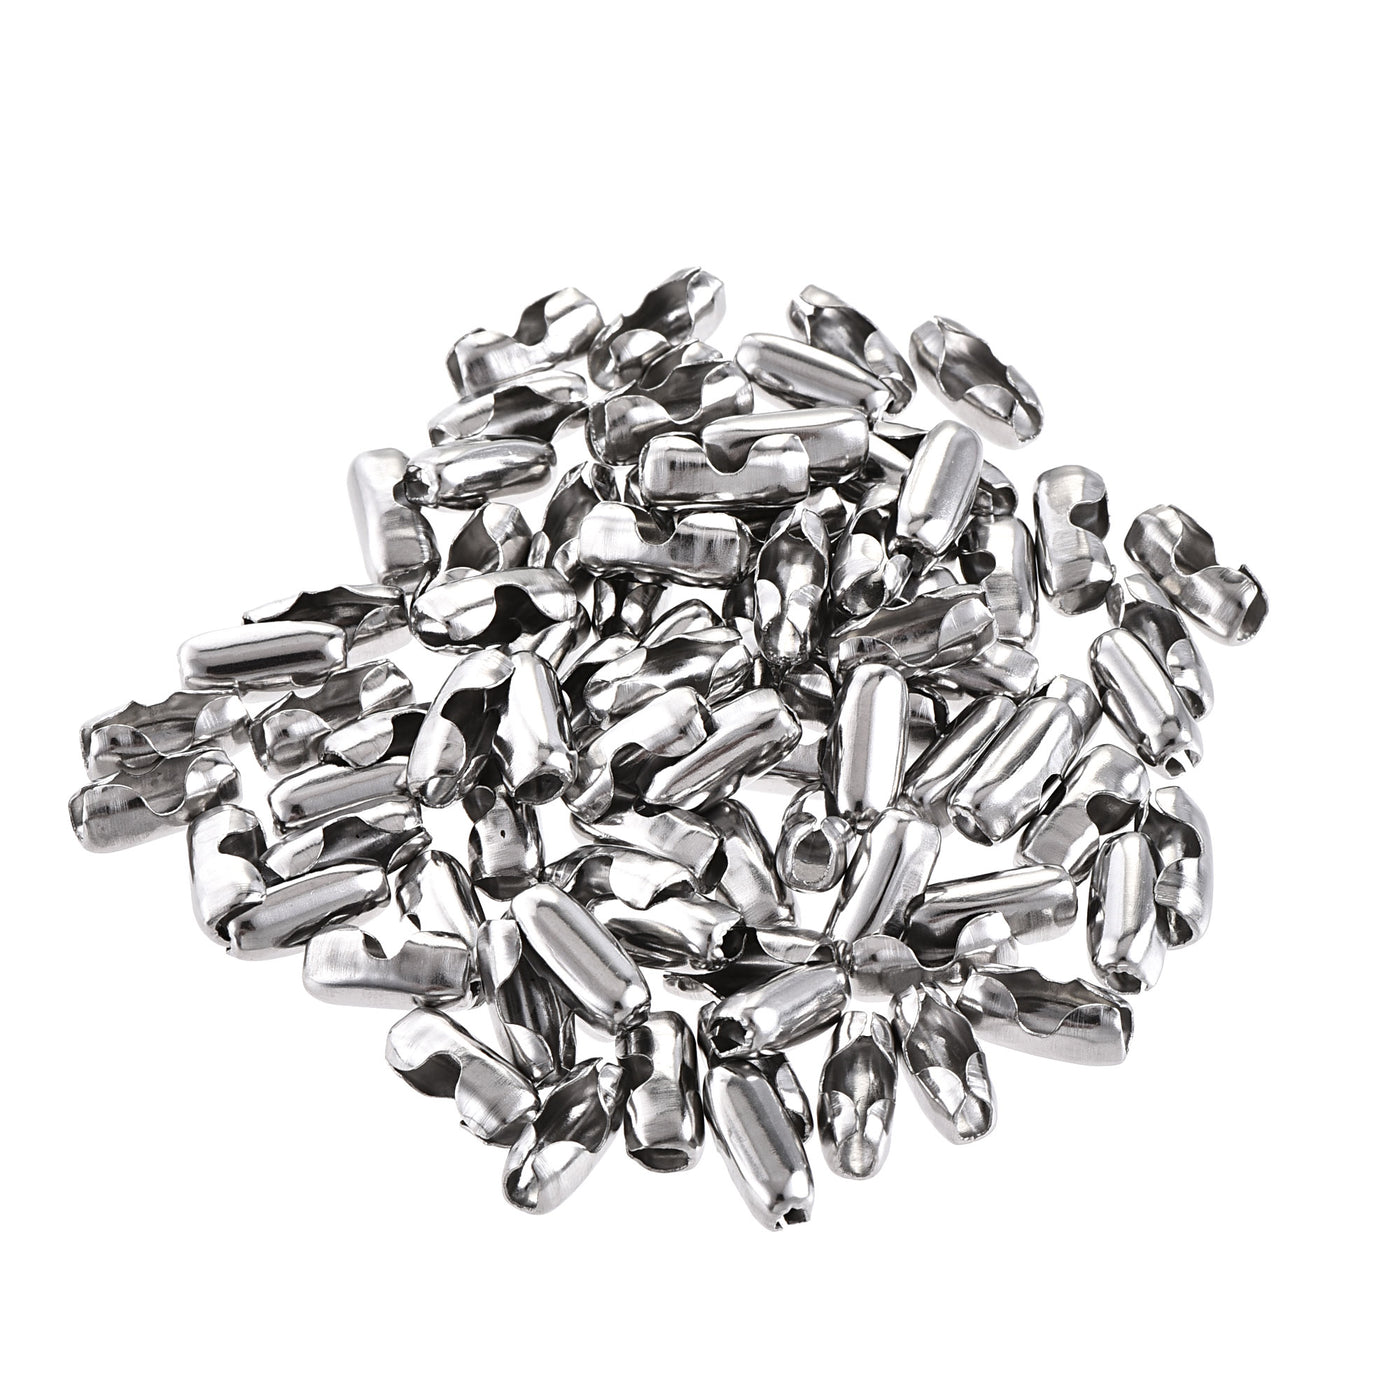 Uxcell Uxcell Ball Chain Connector, 2.4mm Ball Chains Clasp Crimp Clips Link Stainless Steel Connection, Pack of 100